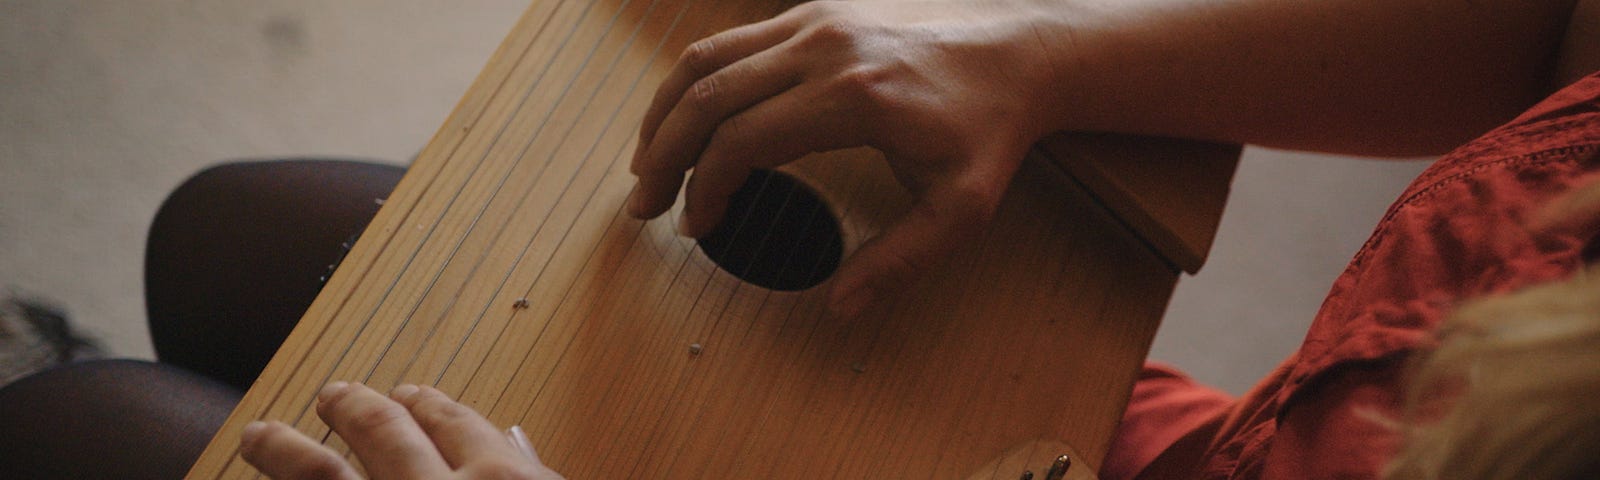 Kannel, also known as Talharpa, also known as bowed harp